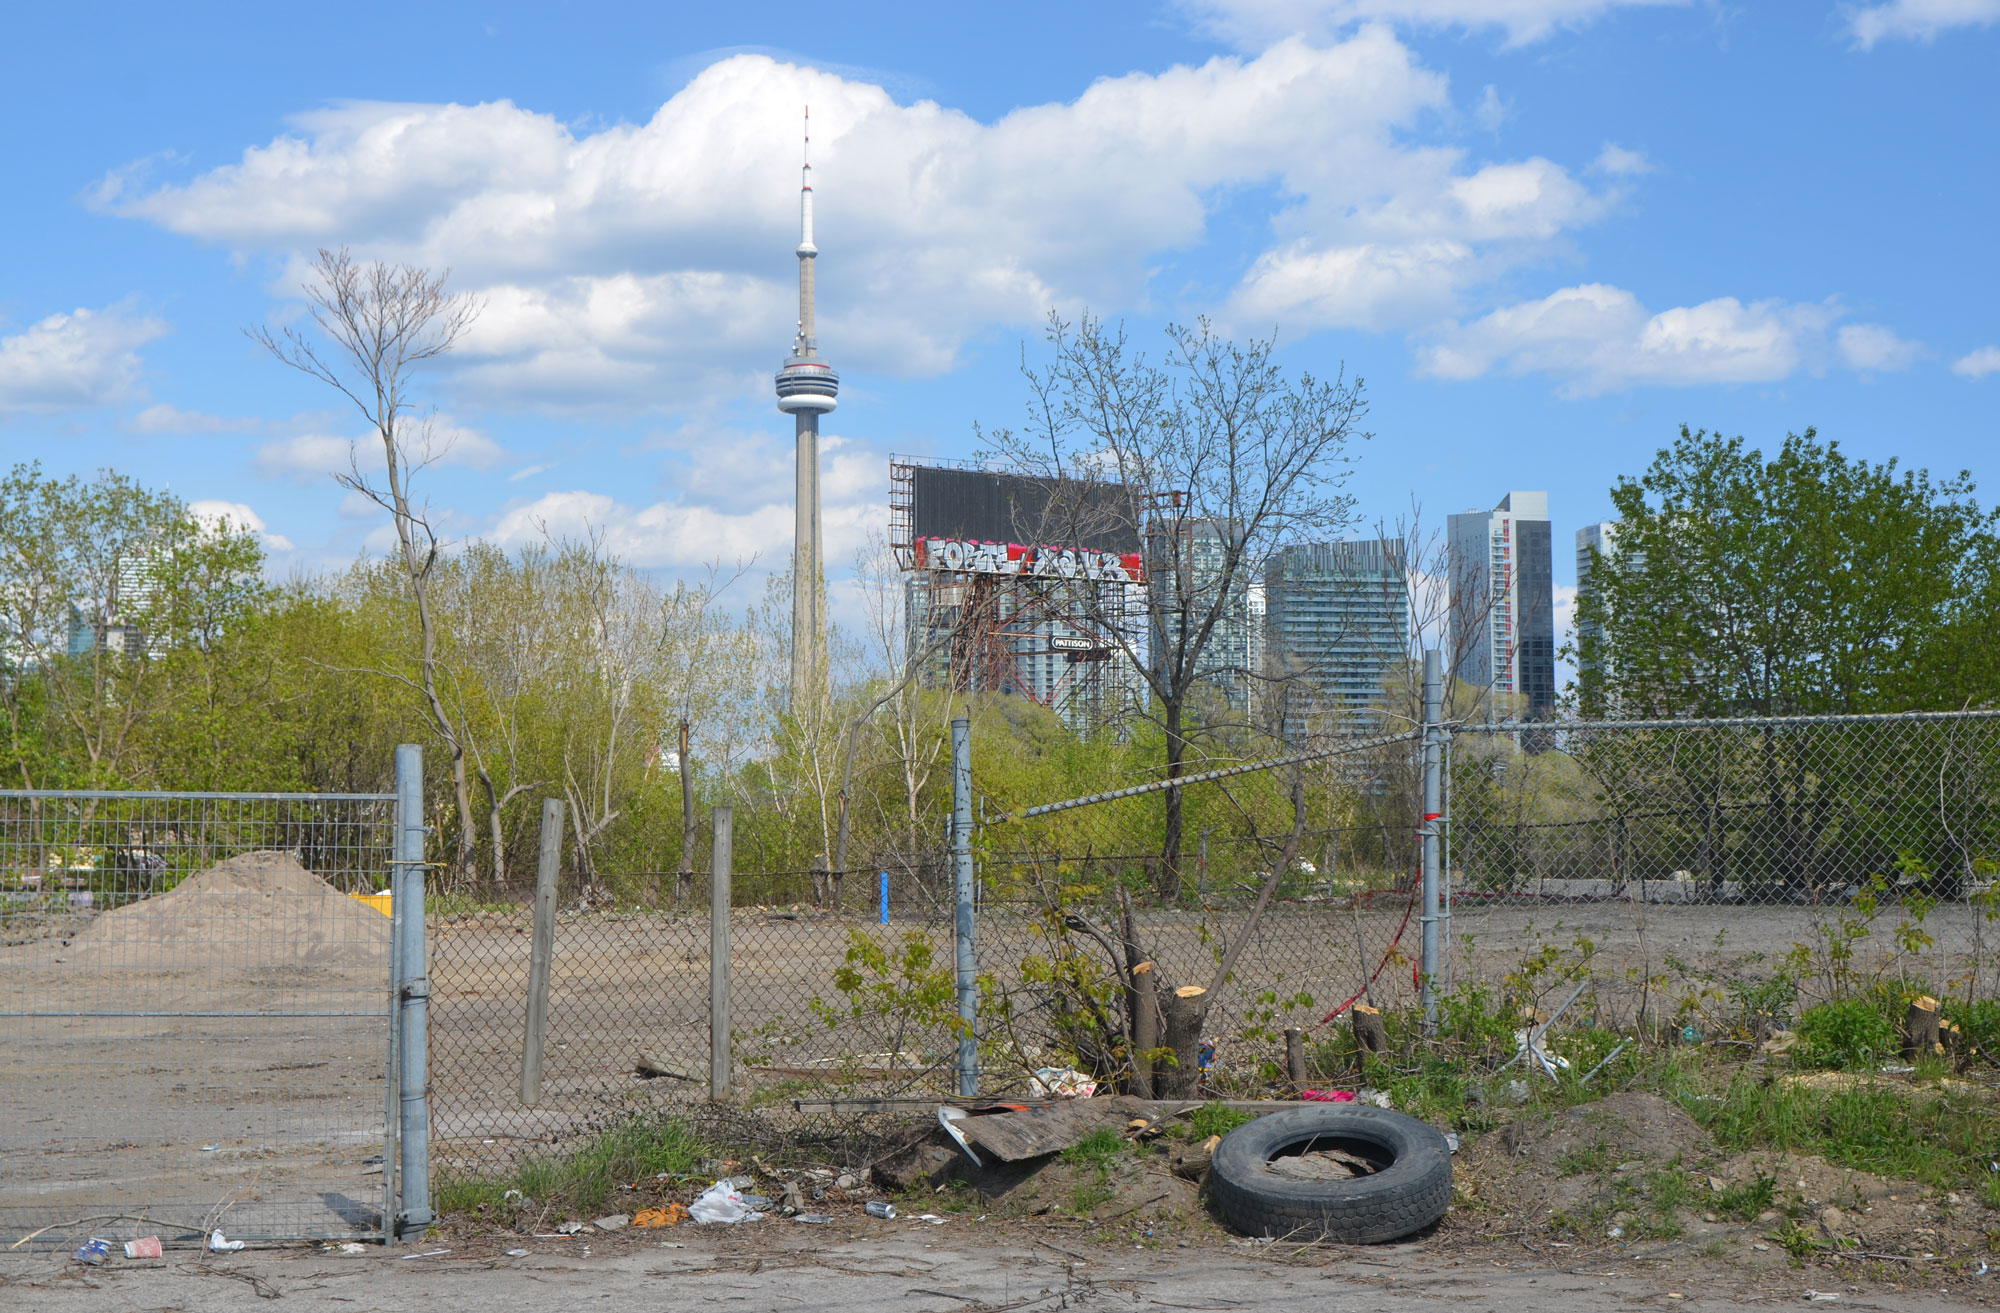 the CN Tower is in the background, a vacant lot waiting for development is in the foreground.  Old tire and some other junk is in front of the fence surrounding the vacant lot 